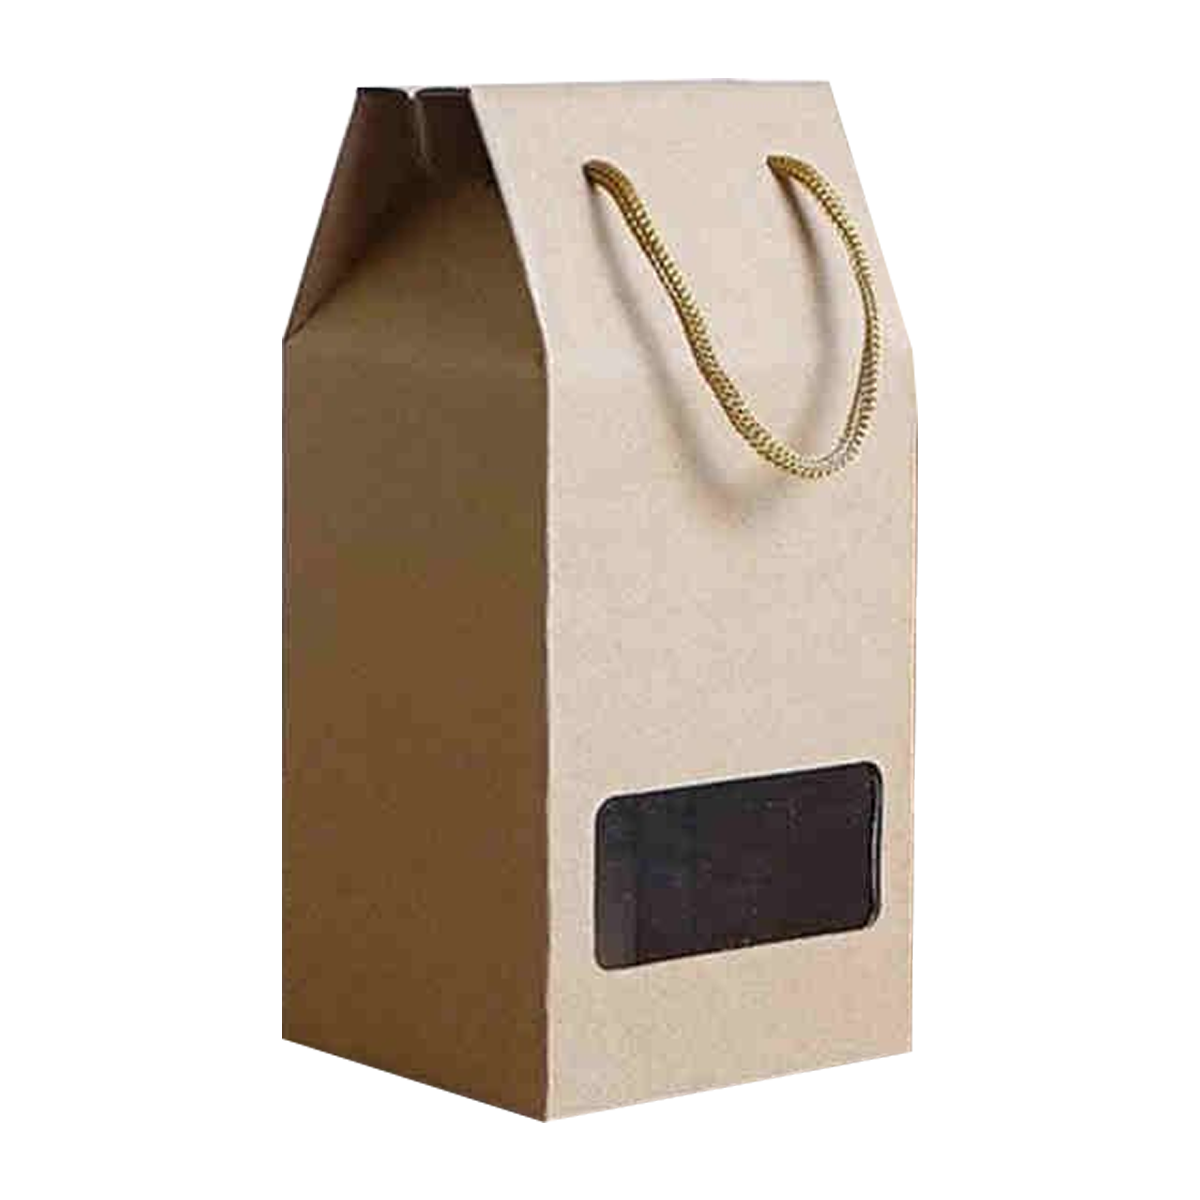 Kraft paper bag with PVC clear window and rope handle plain shipping box for dry food packing (20x10x10Cms)- Pack of 12 - Willow